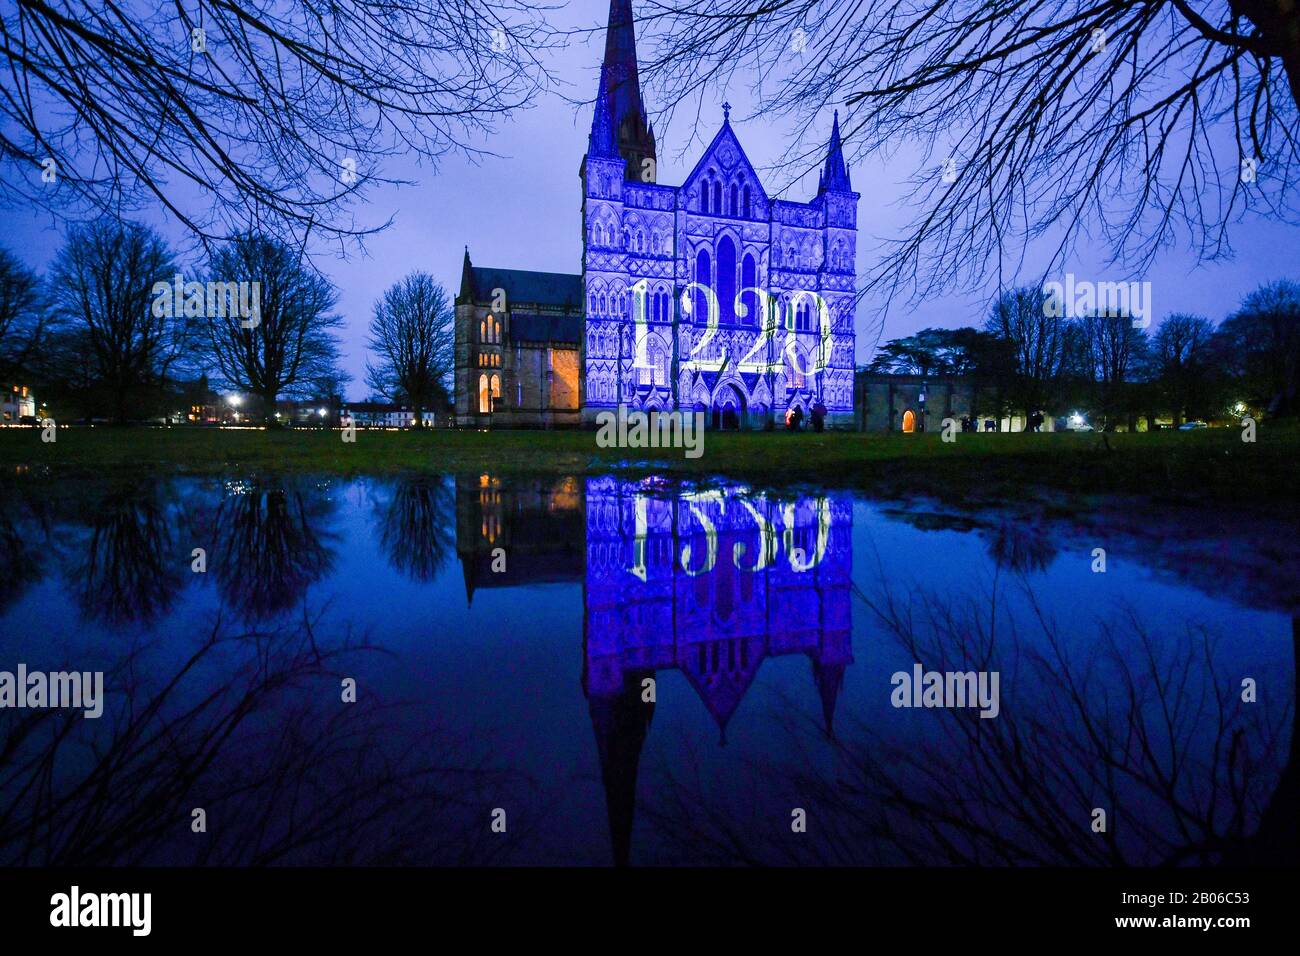 Light projections cover the West Front of Salisbury Cathedral, where a light and sound art installation, titled Sarum Lights, is marking the Cathedral's 800th anniversary in 2020, by lighting the inside and outside along with music. Stock Photo